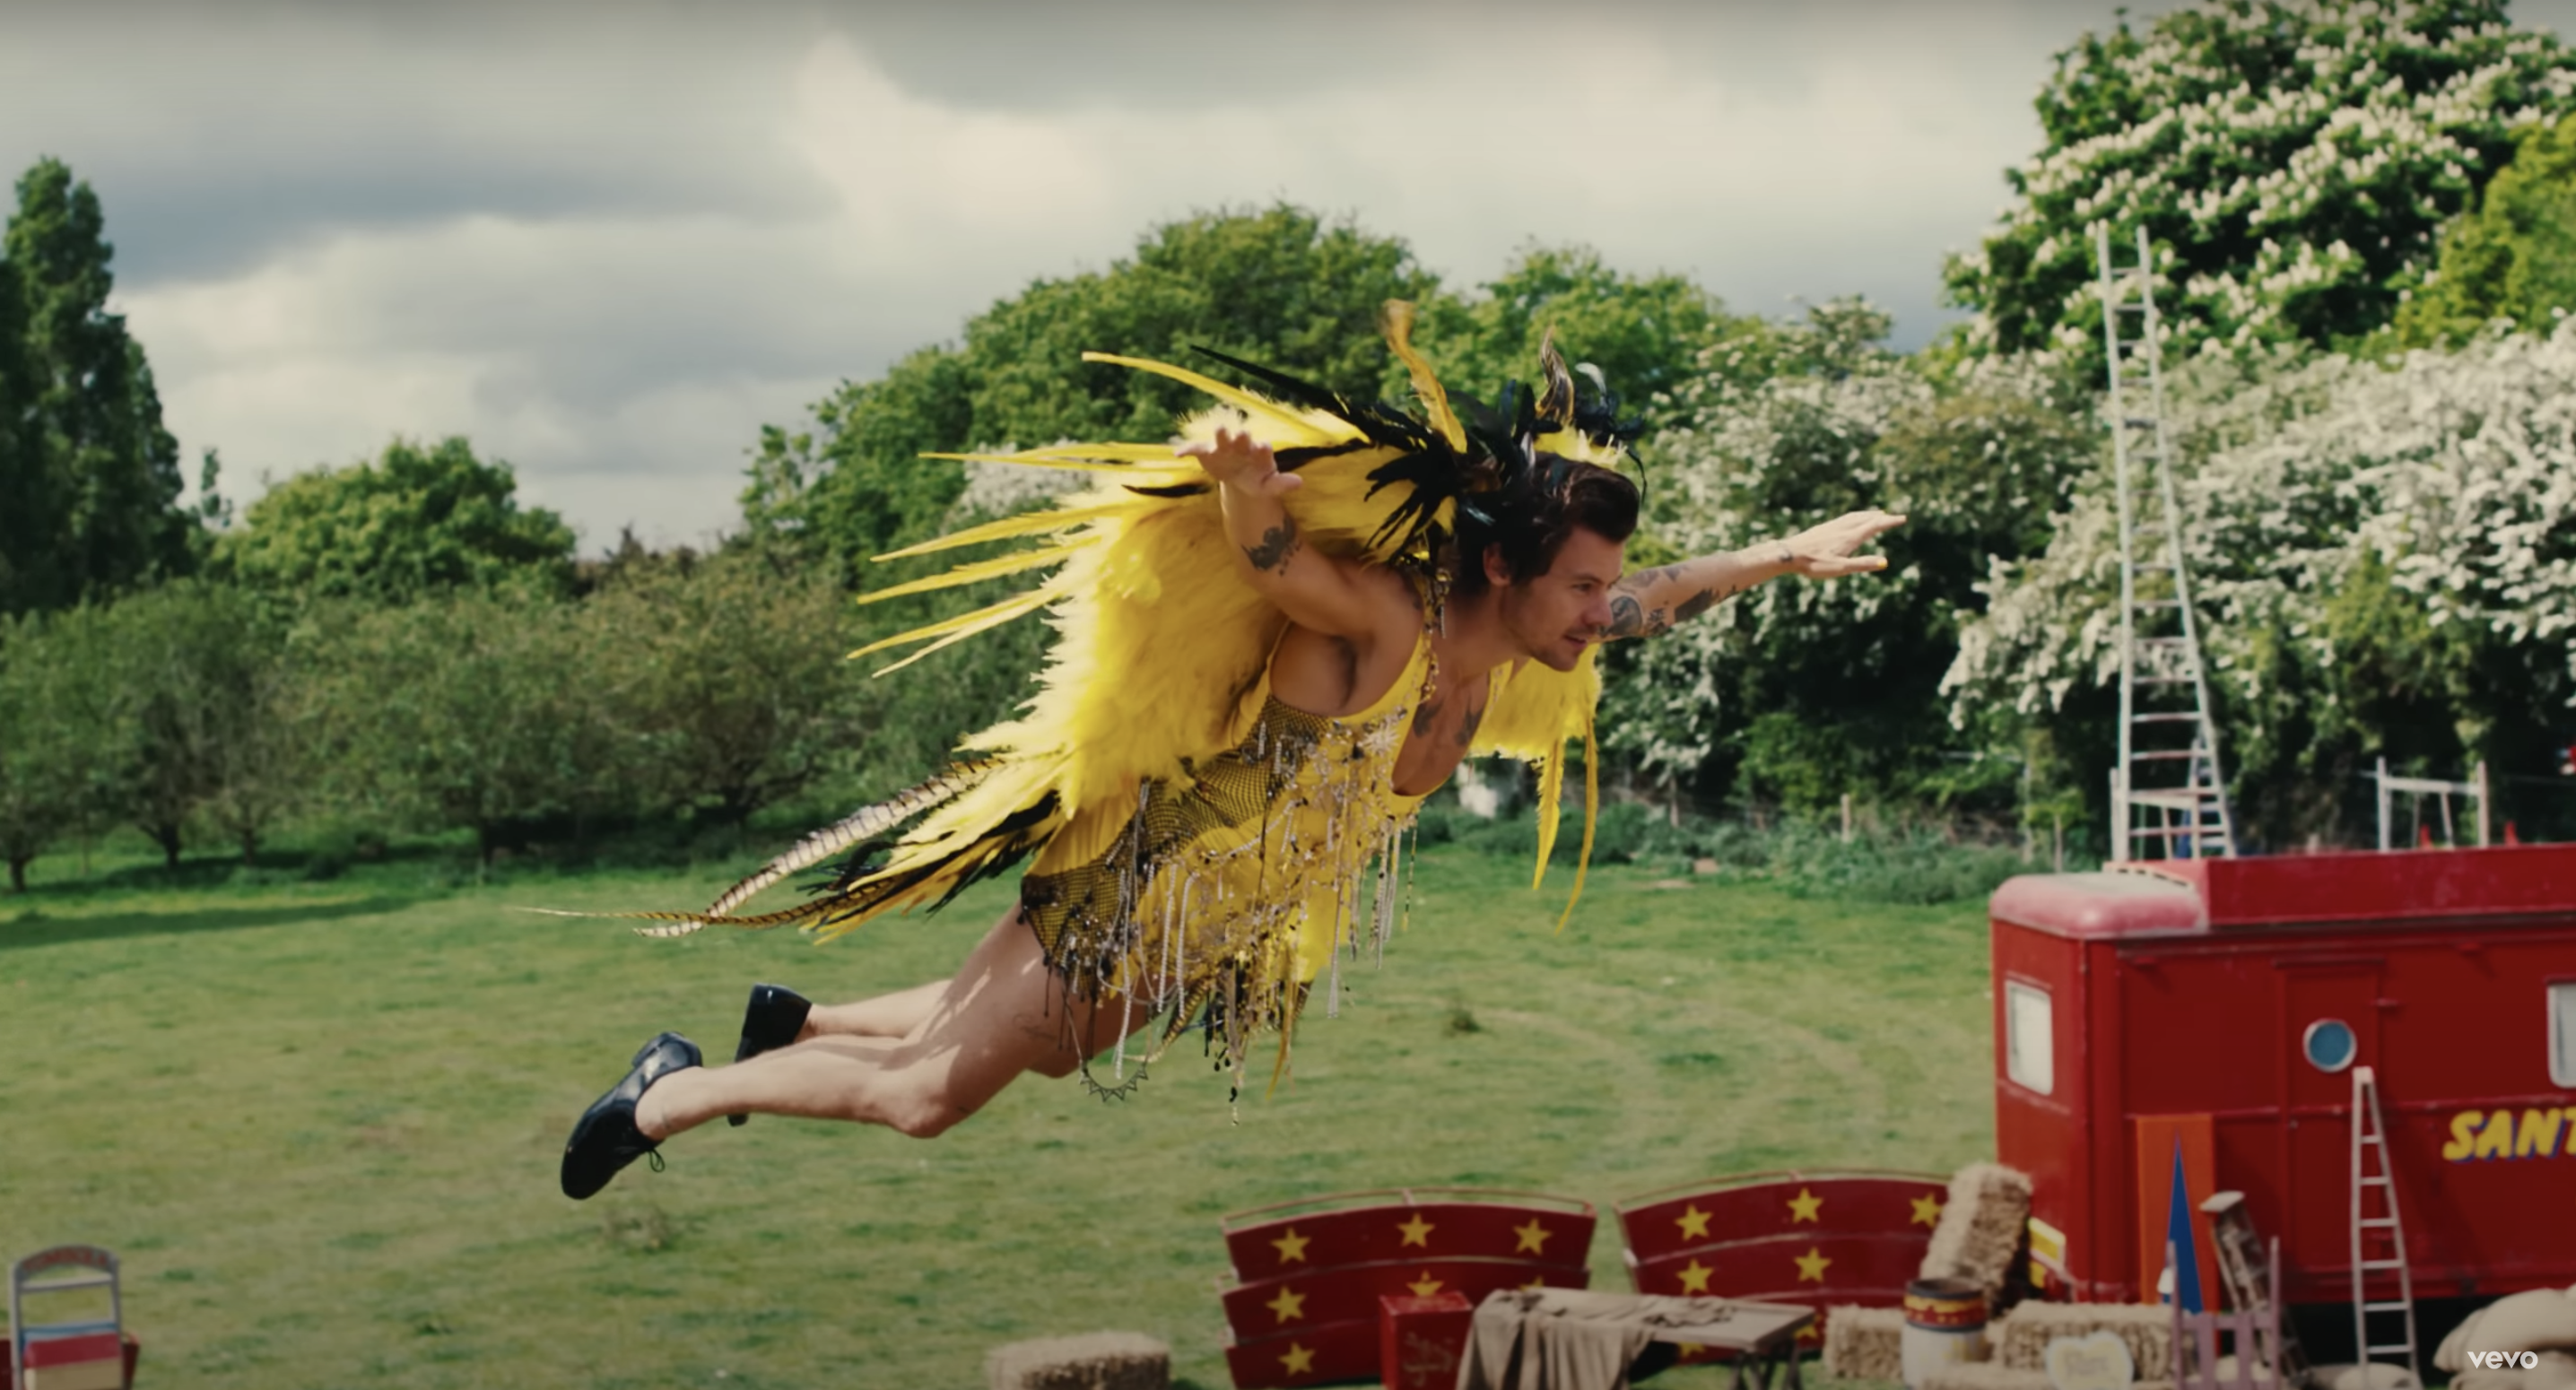 Harry Styles Flies Like a Bird in Circus-Themed 'Daylight' Video